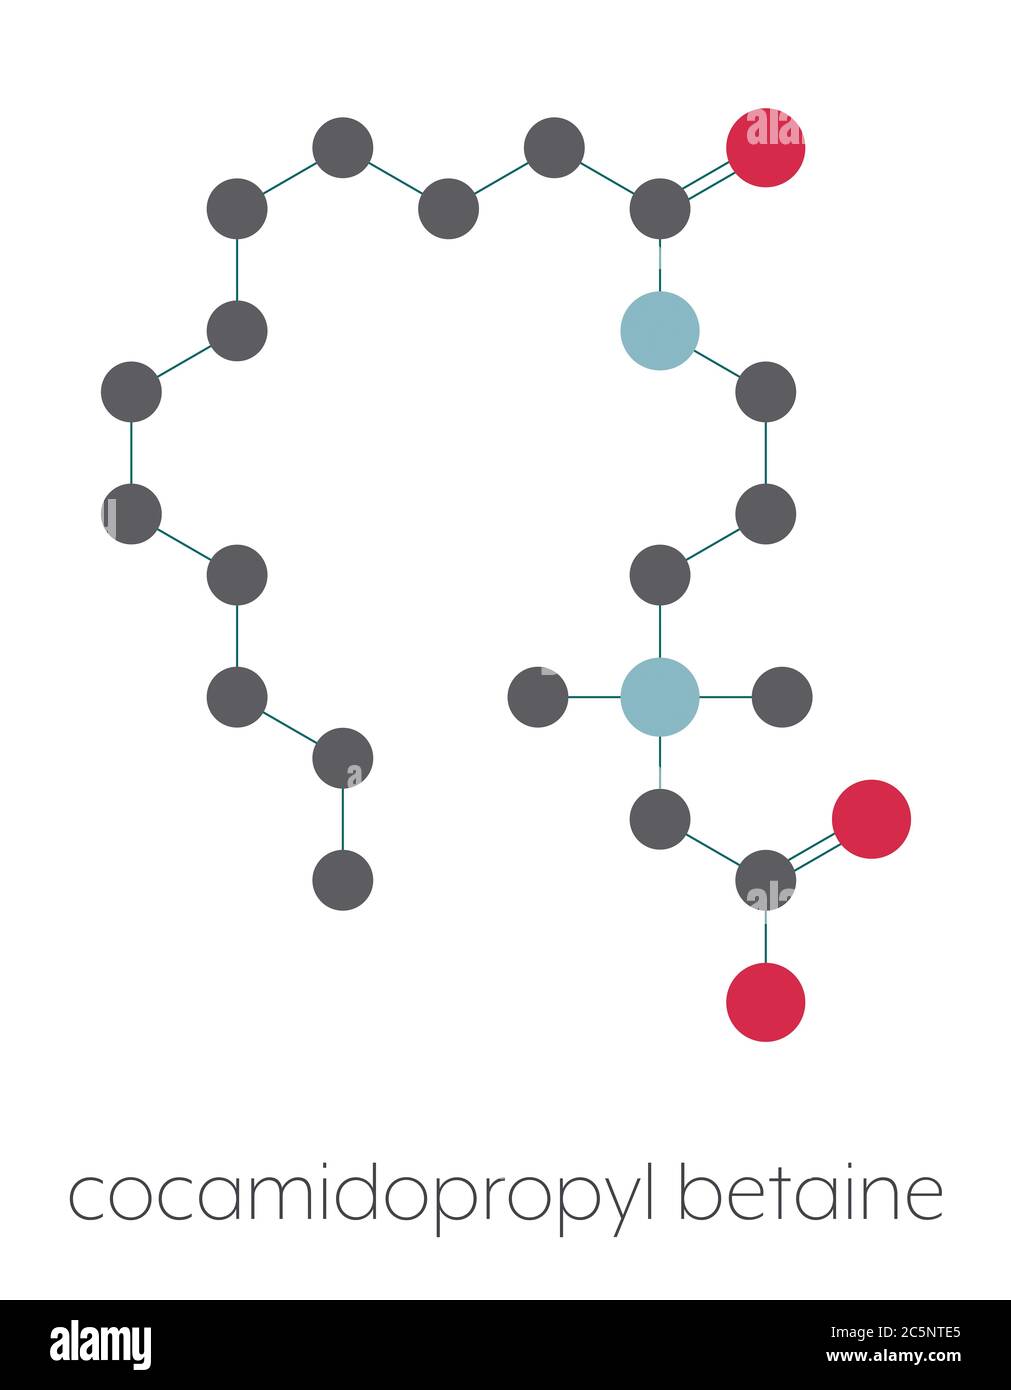 Suri Sanktion kylling Cocamidopropyl betaine (CAPB) synthetic surfactant molecule. Used in shampoo,  soap, hair conditioner, etc. Stylized skeletal formula (chemical  structure): Atoms are shown as color-coded circles: hydrogen (hidden),  carbon (grey), nitrogen (blue), oxygen ...